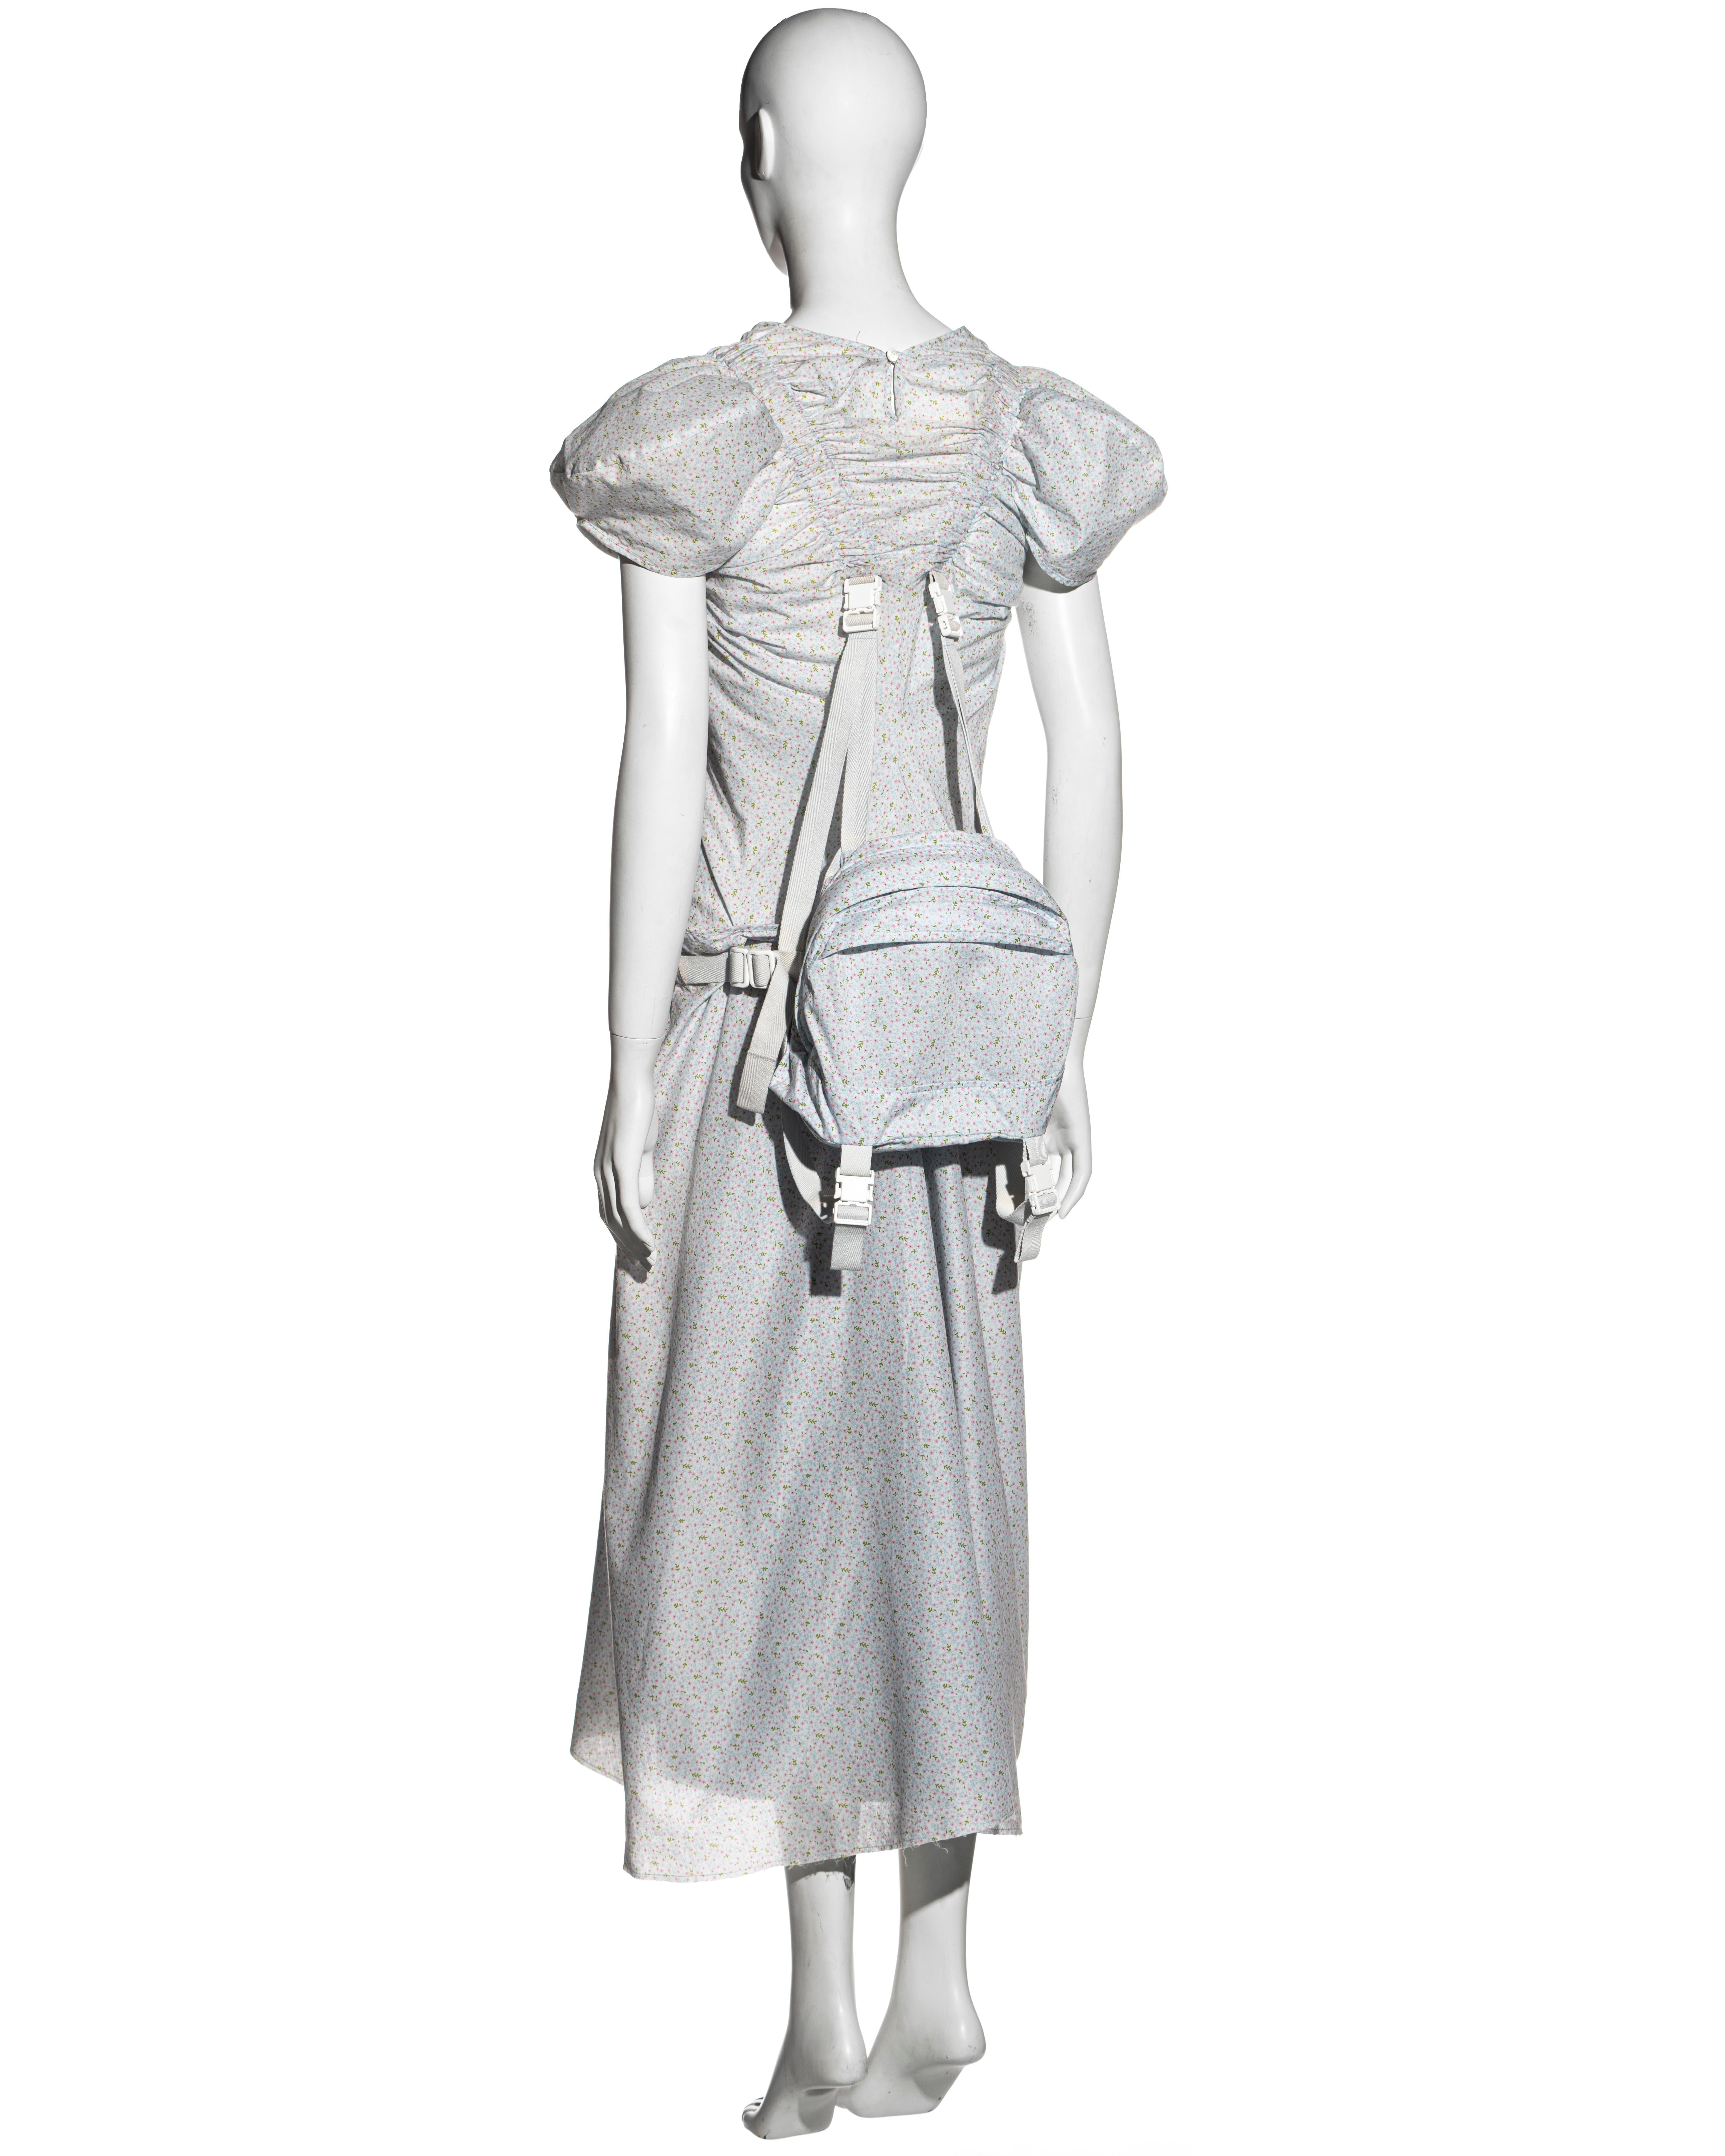 Women's Junya Watanabe floral cotton dress with harness straps and backpack, ss 2003 For Sale